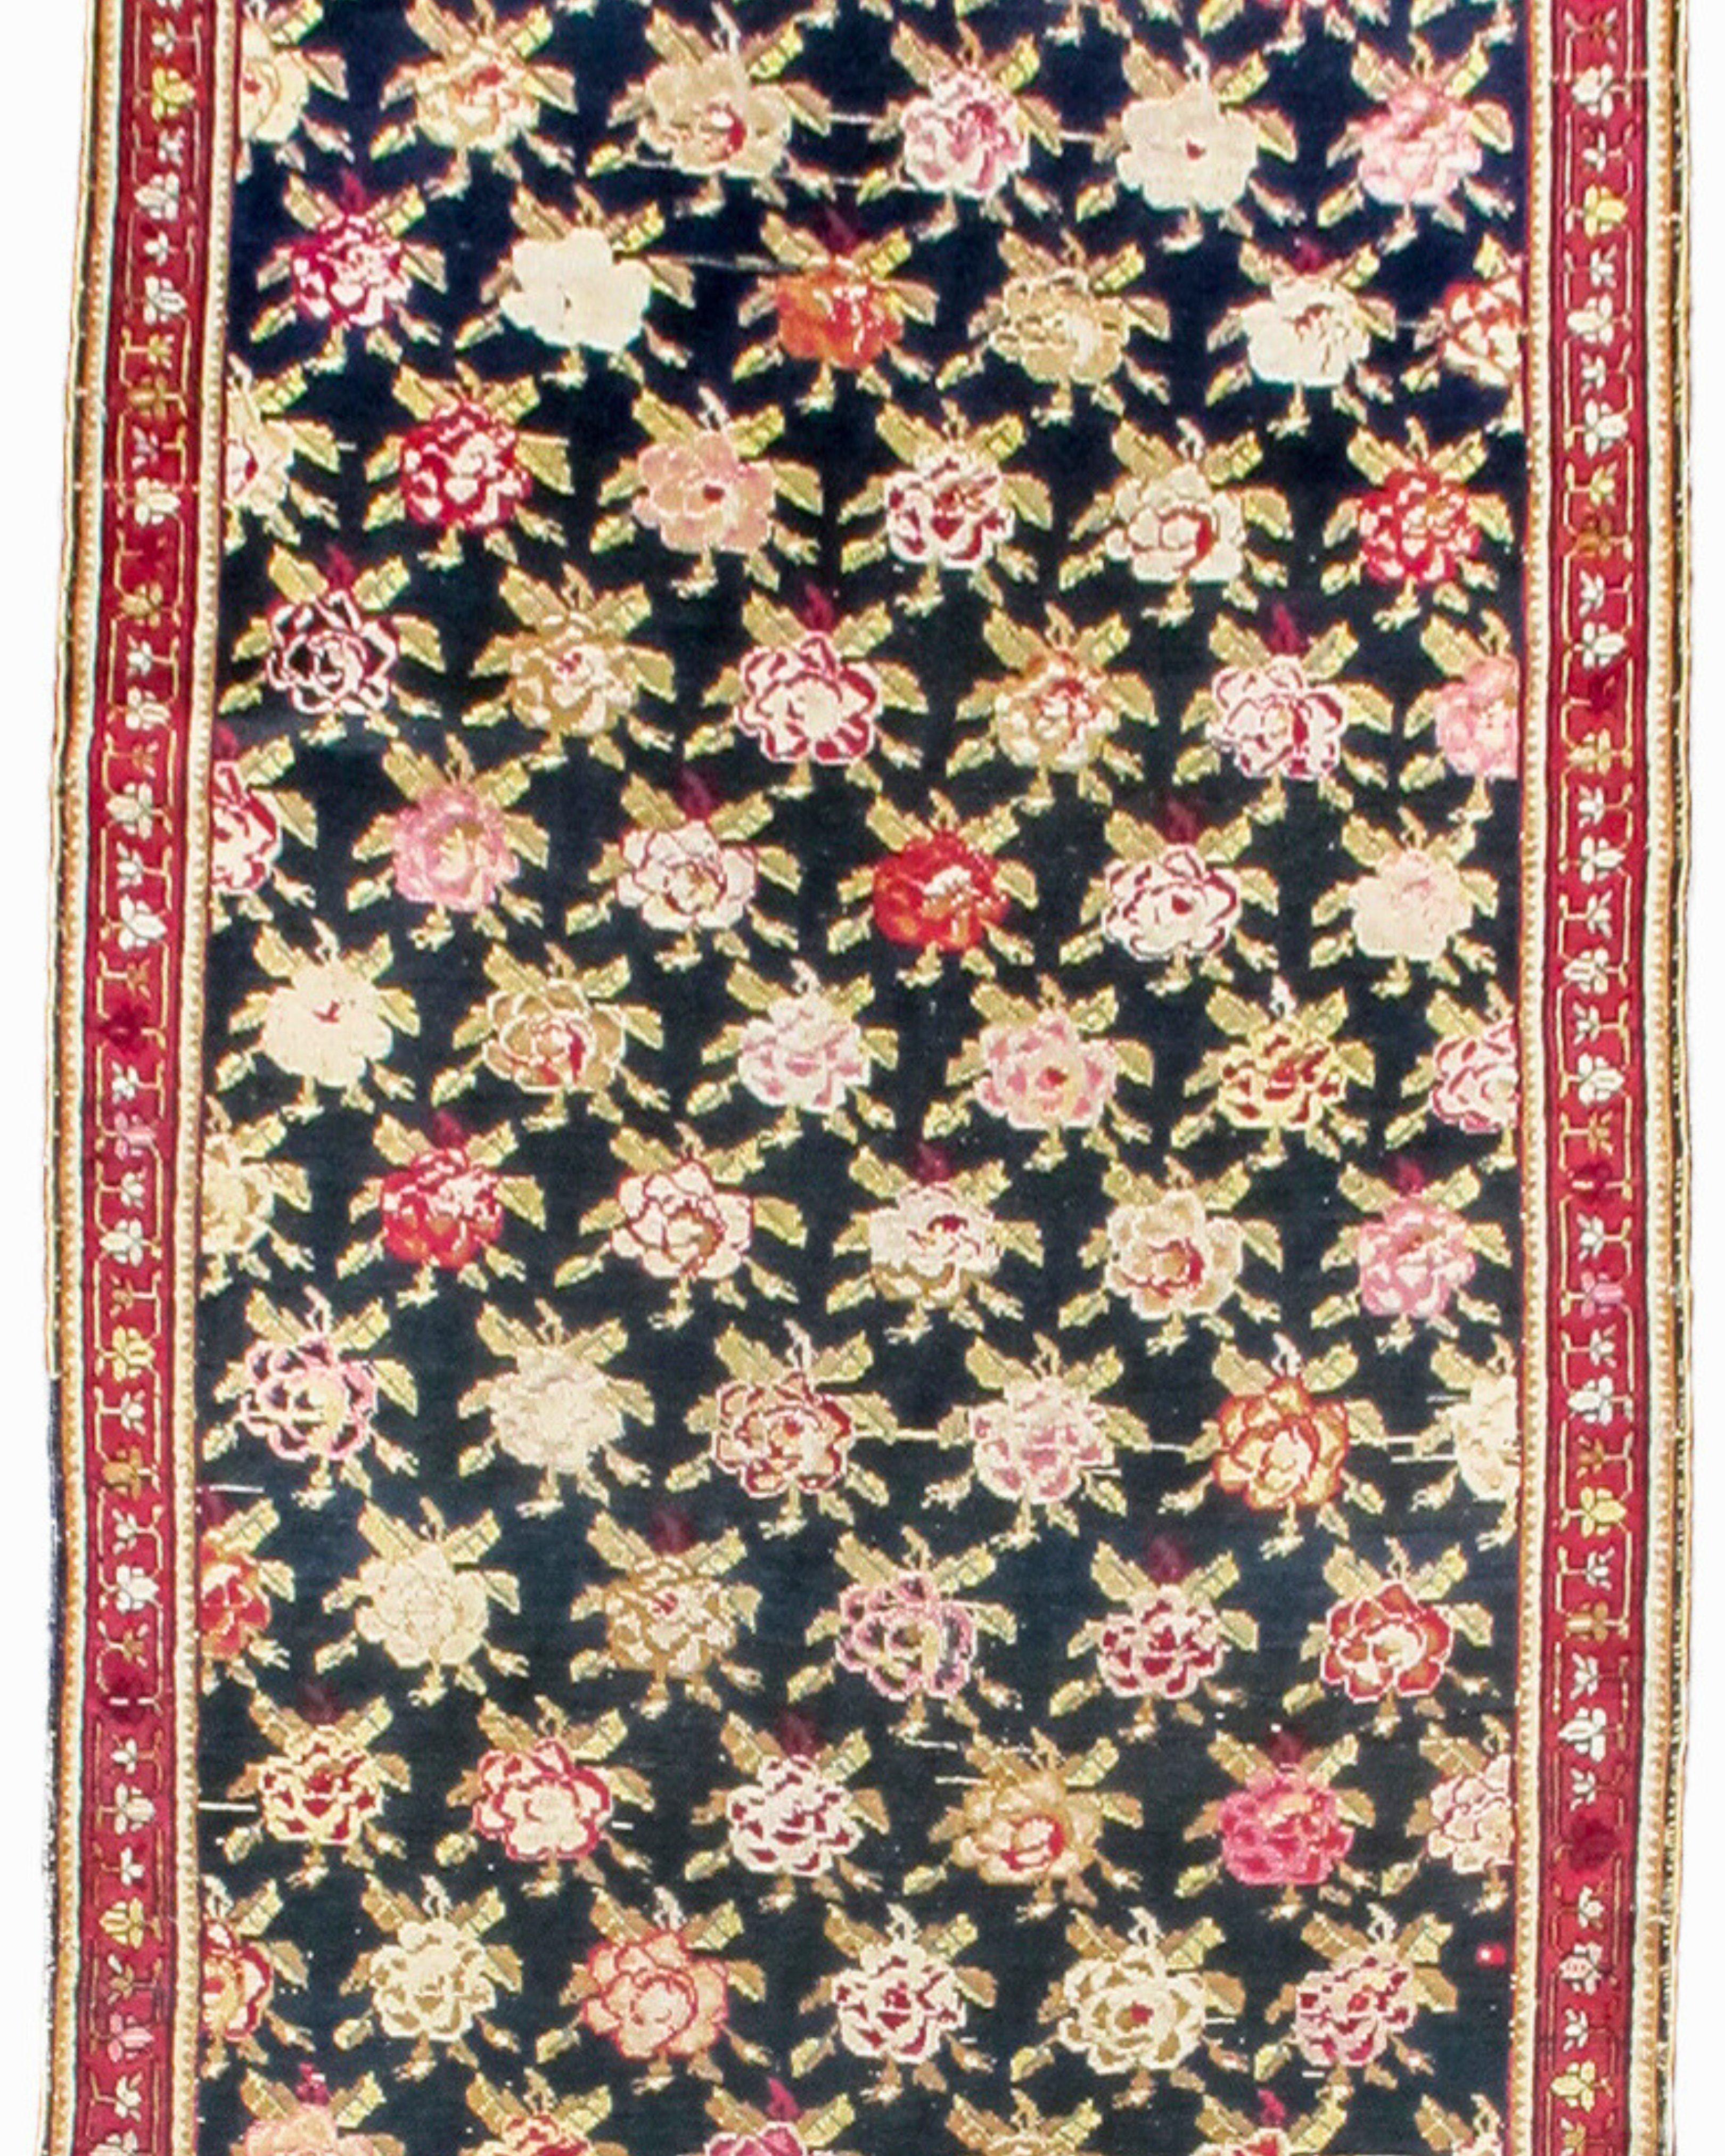 Antique Caucasian Karabagh Runner, 19th Century In Good Condition For Sale In San Francisco, CA